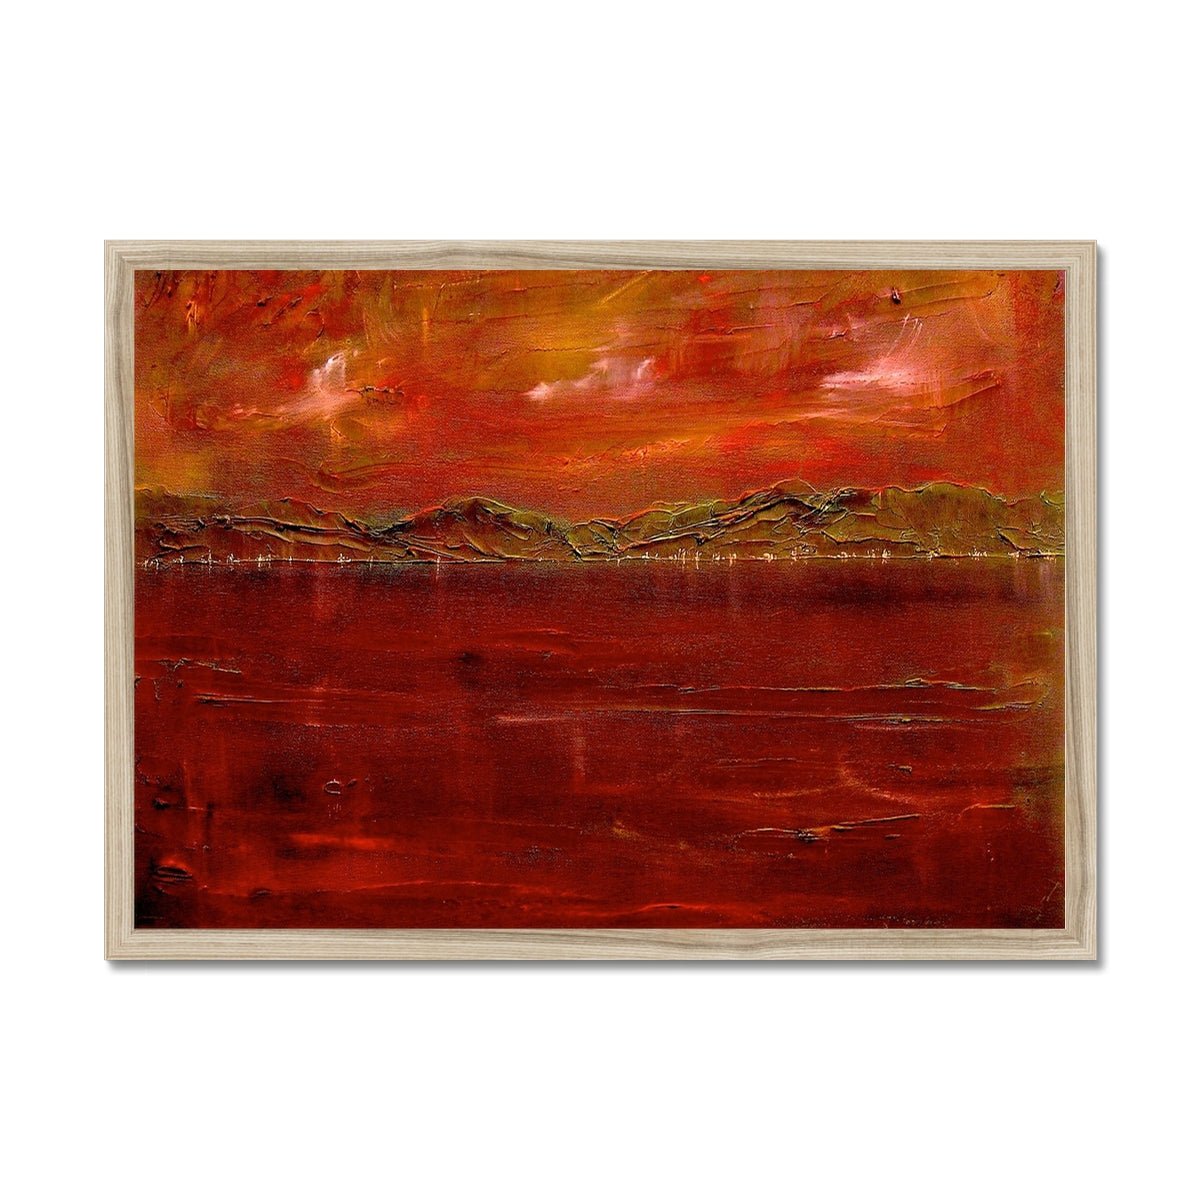 Deep Clyde Dusk Painting | Framed Prints From Scotland-Framed Prints-River Clyde Art Gallery-A2 Landscape-Natural Frame-Paintings, Prints, Homeware, Art Gifts From Scotland By Scottish Artist Kevin Hunter